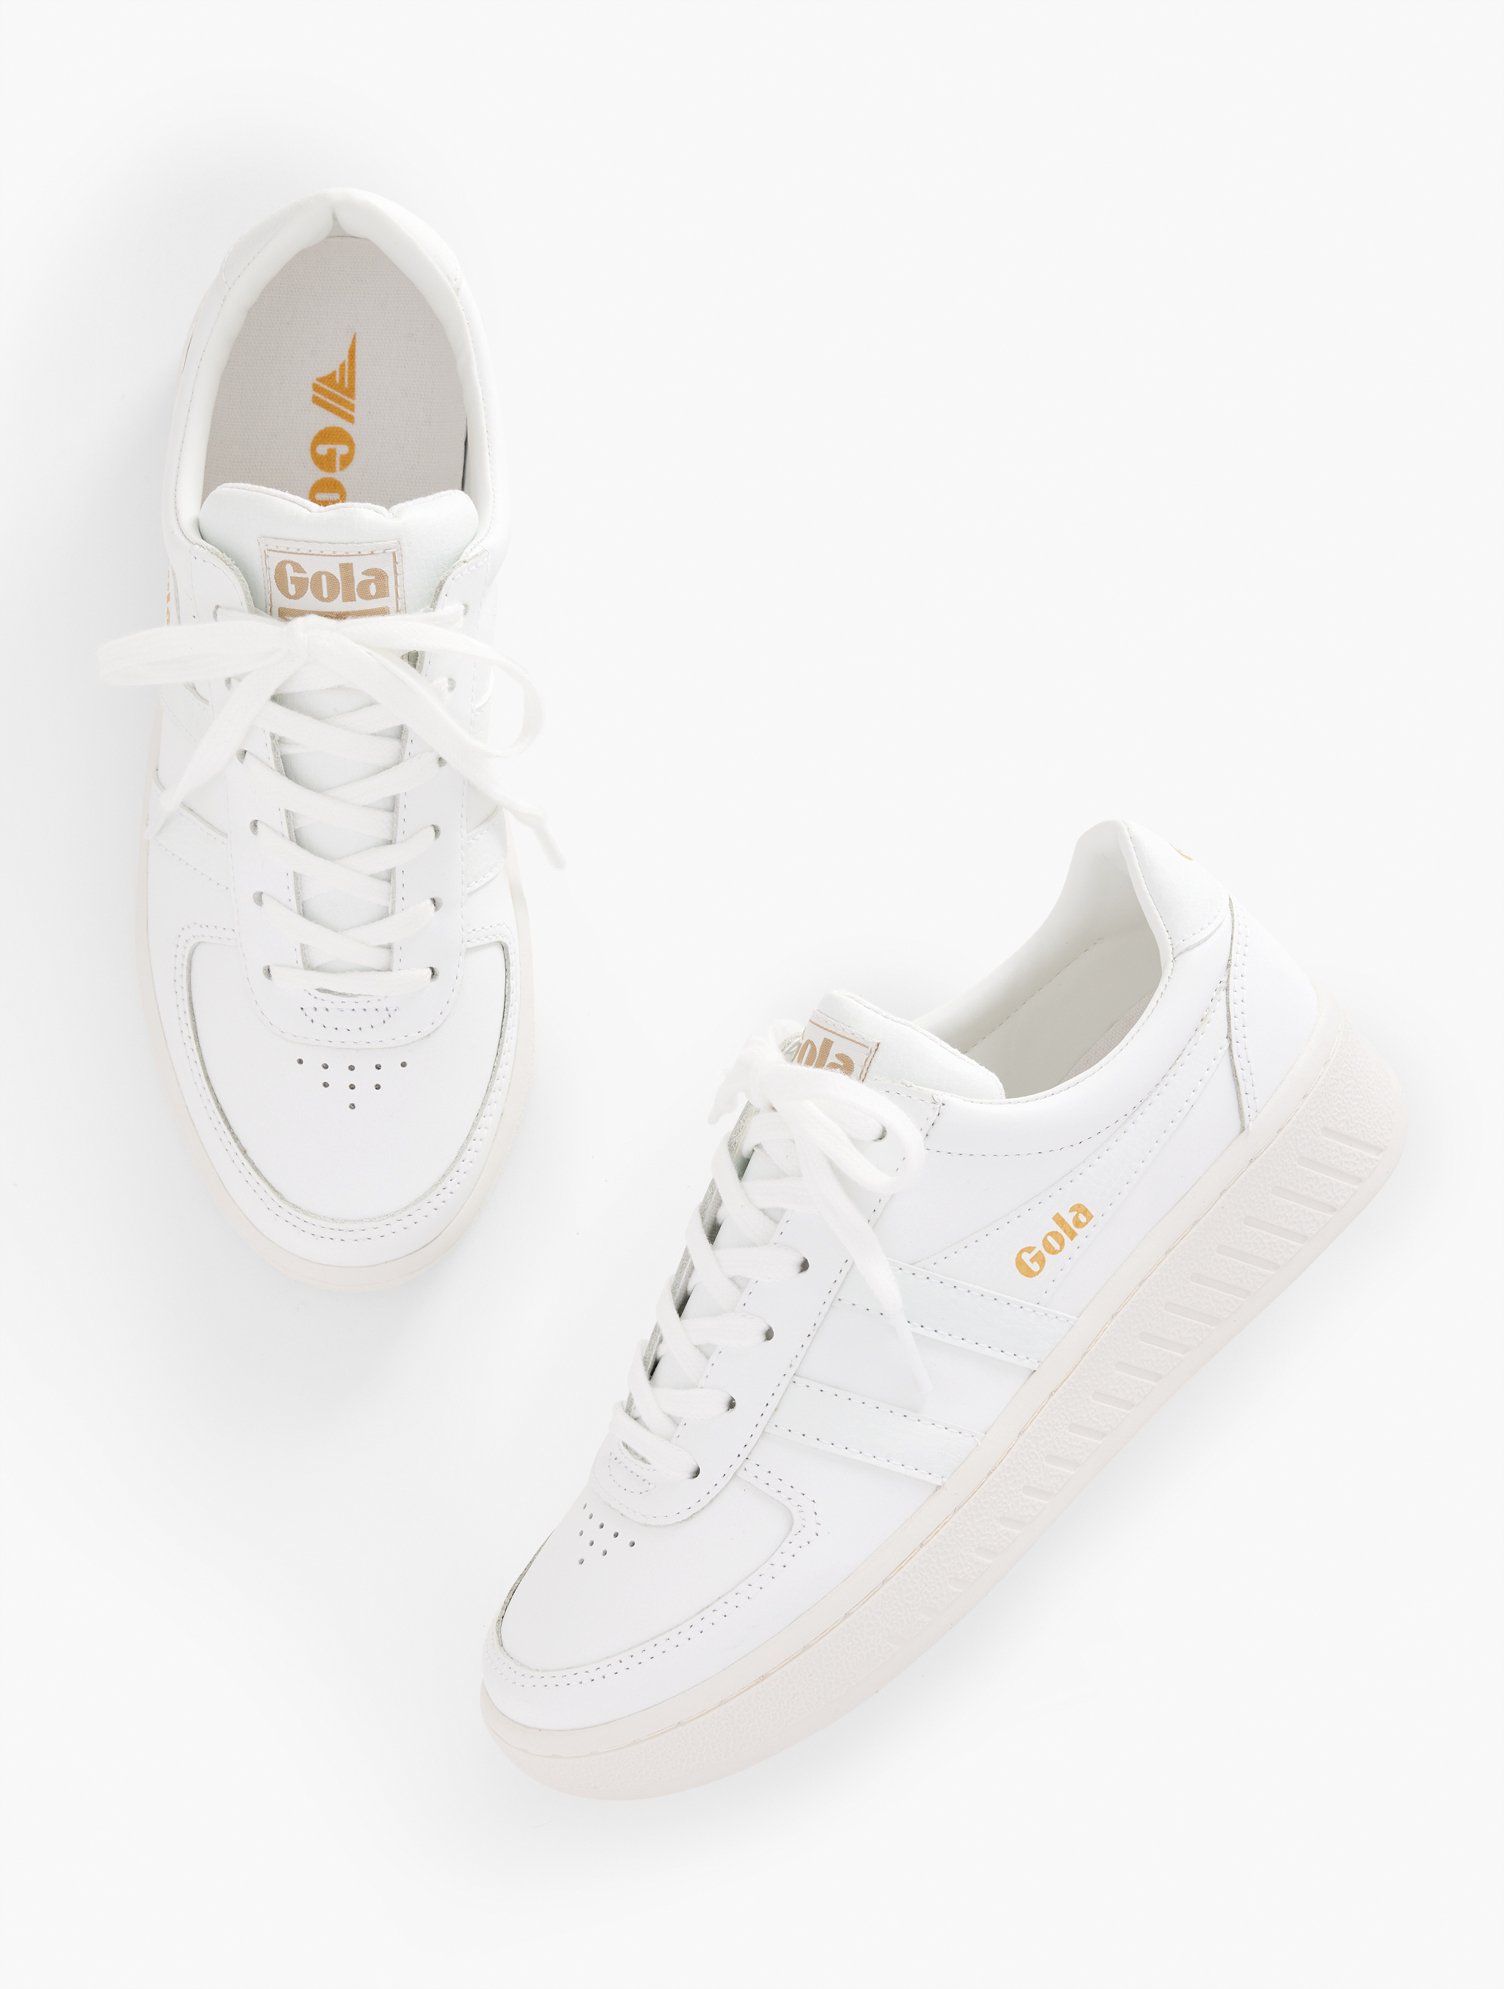 Talbots Golaâ® Grandslam Leather Sneakers - White - 9 1/2 M